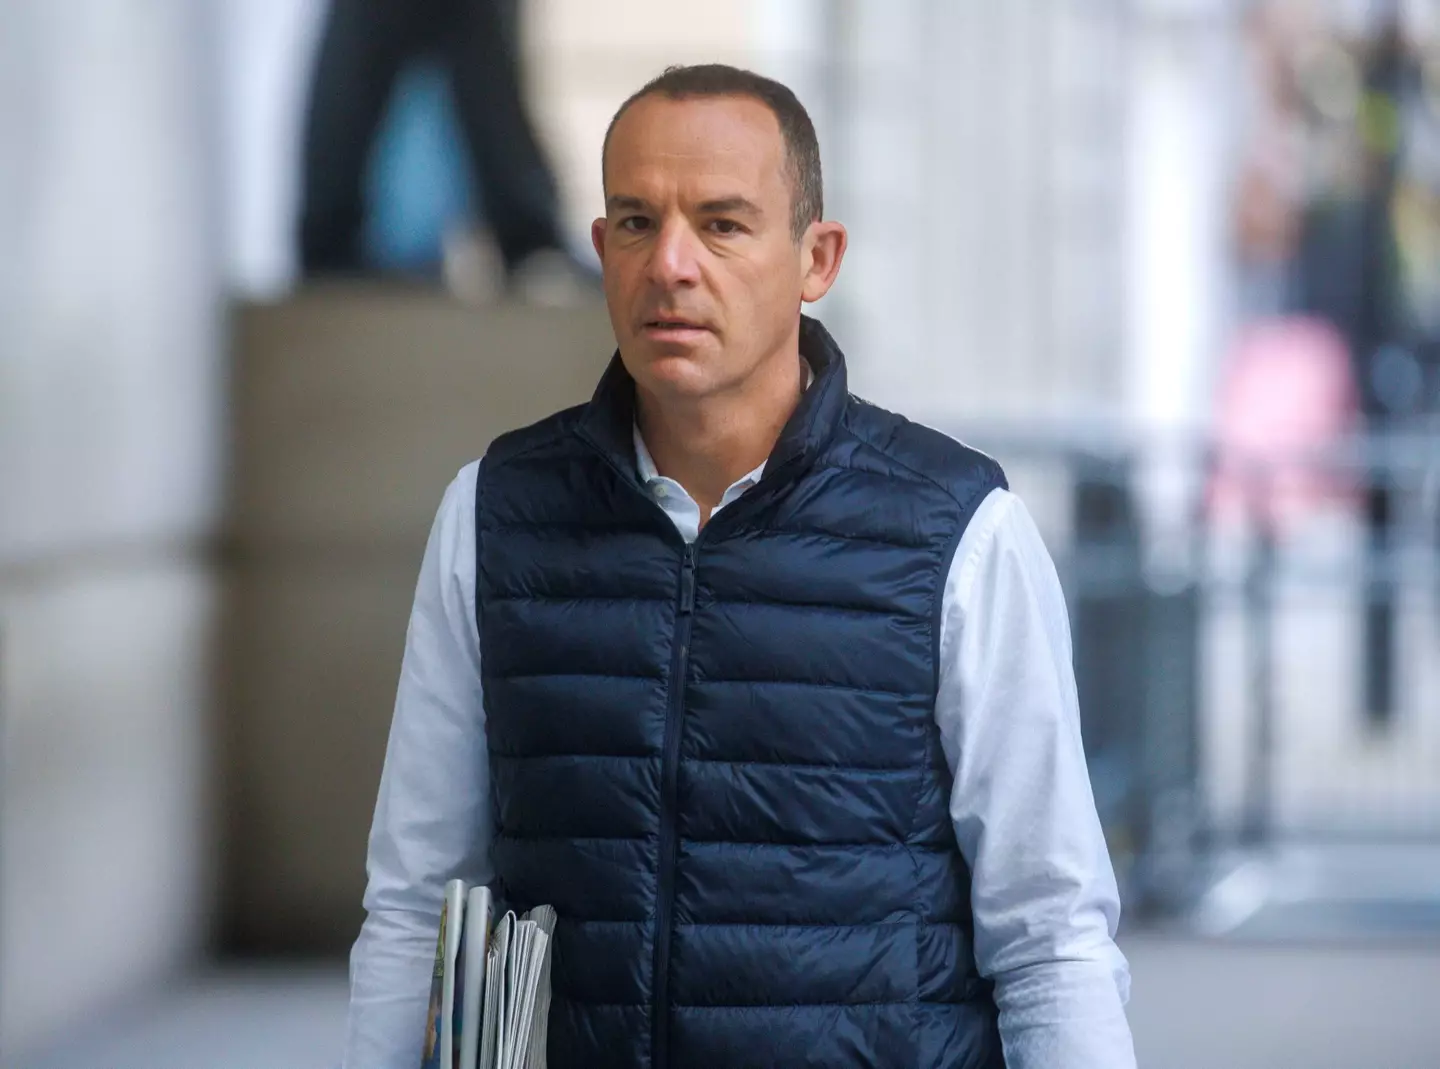 Martin Lewis was forced to delete a sweet tweet about his daughter.